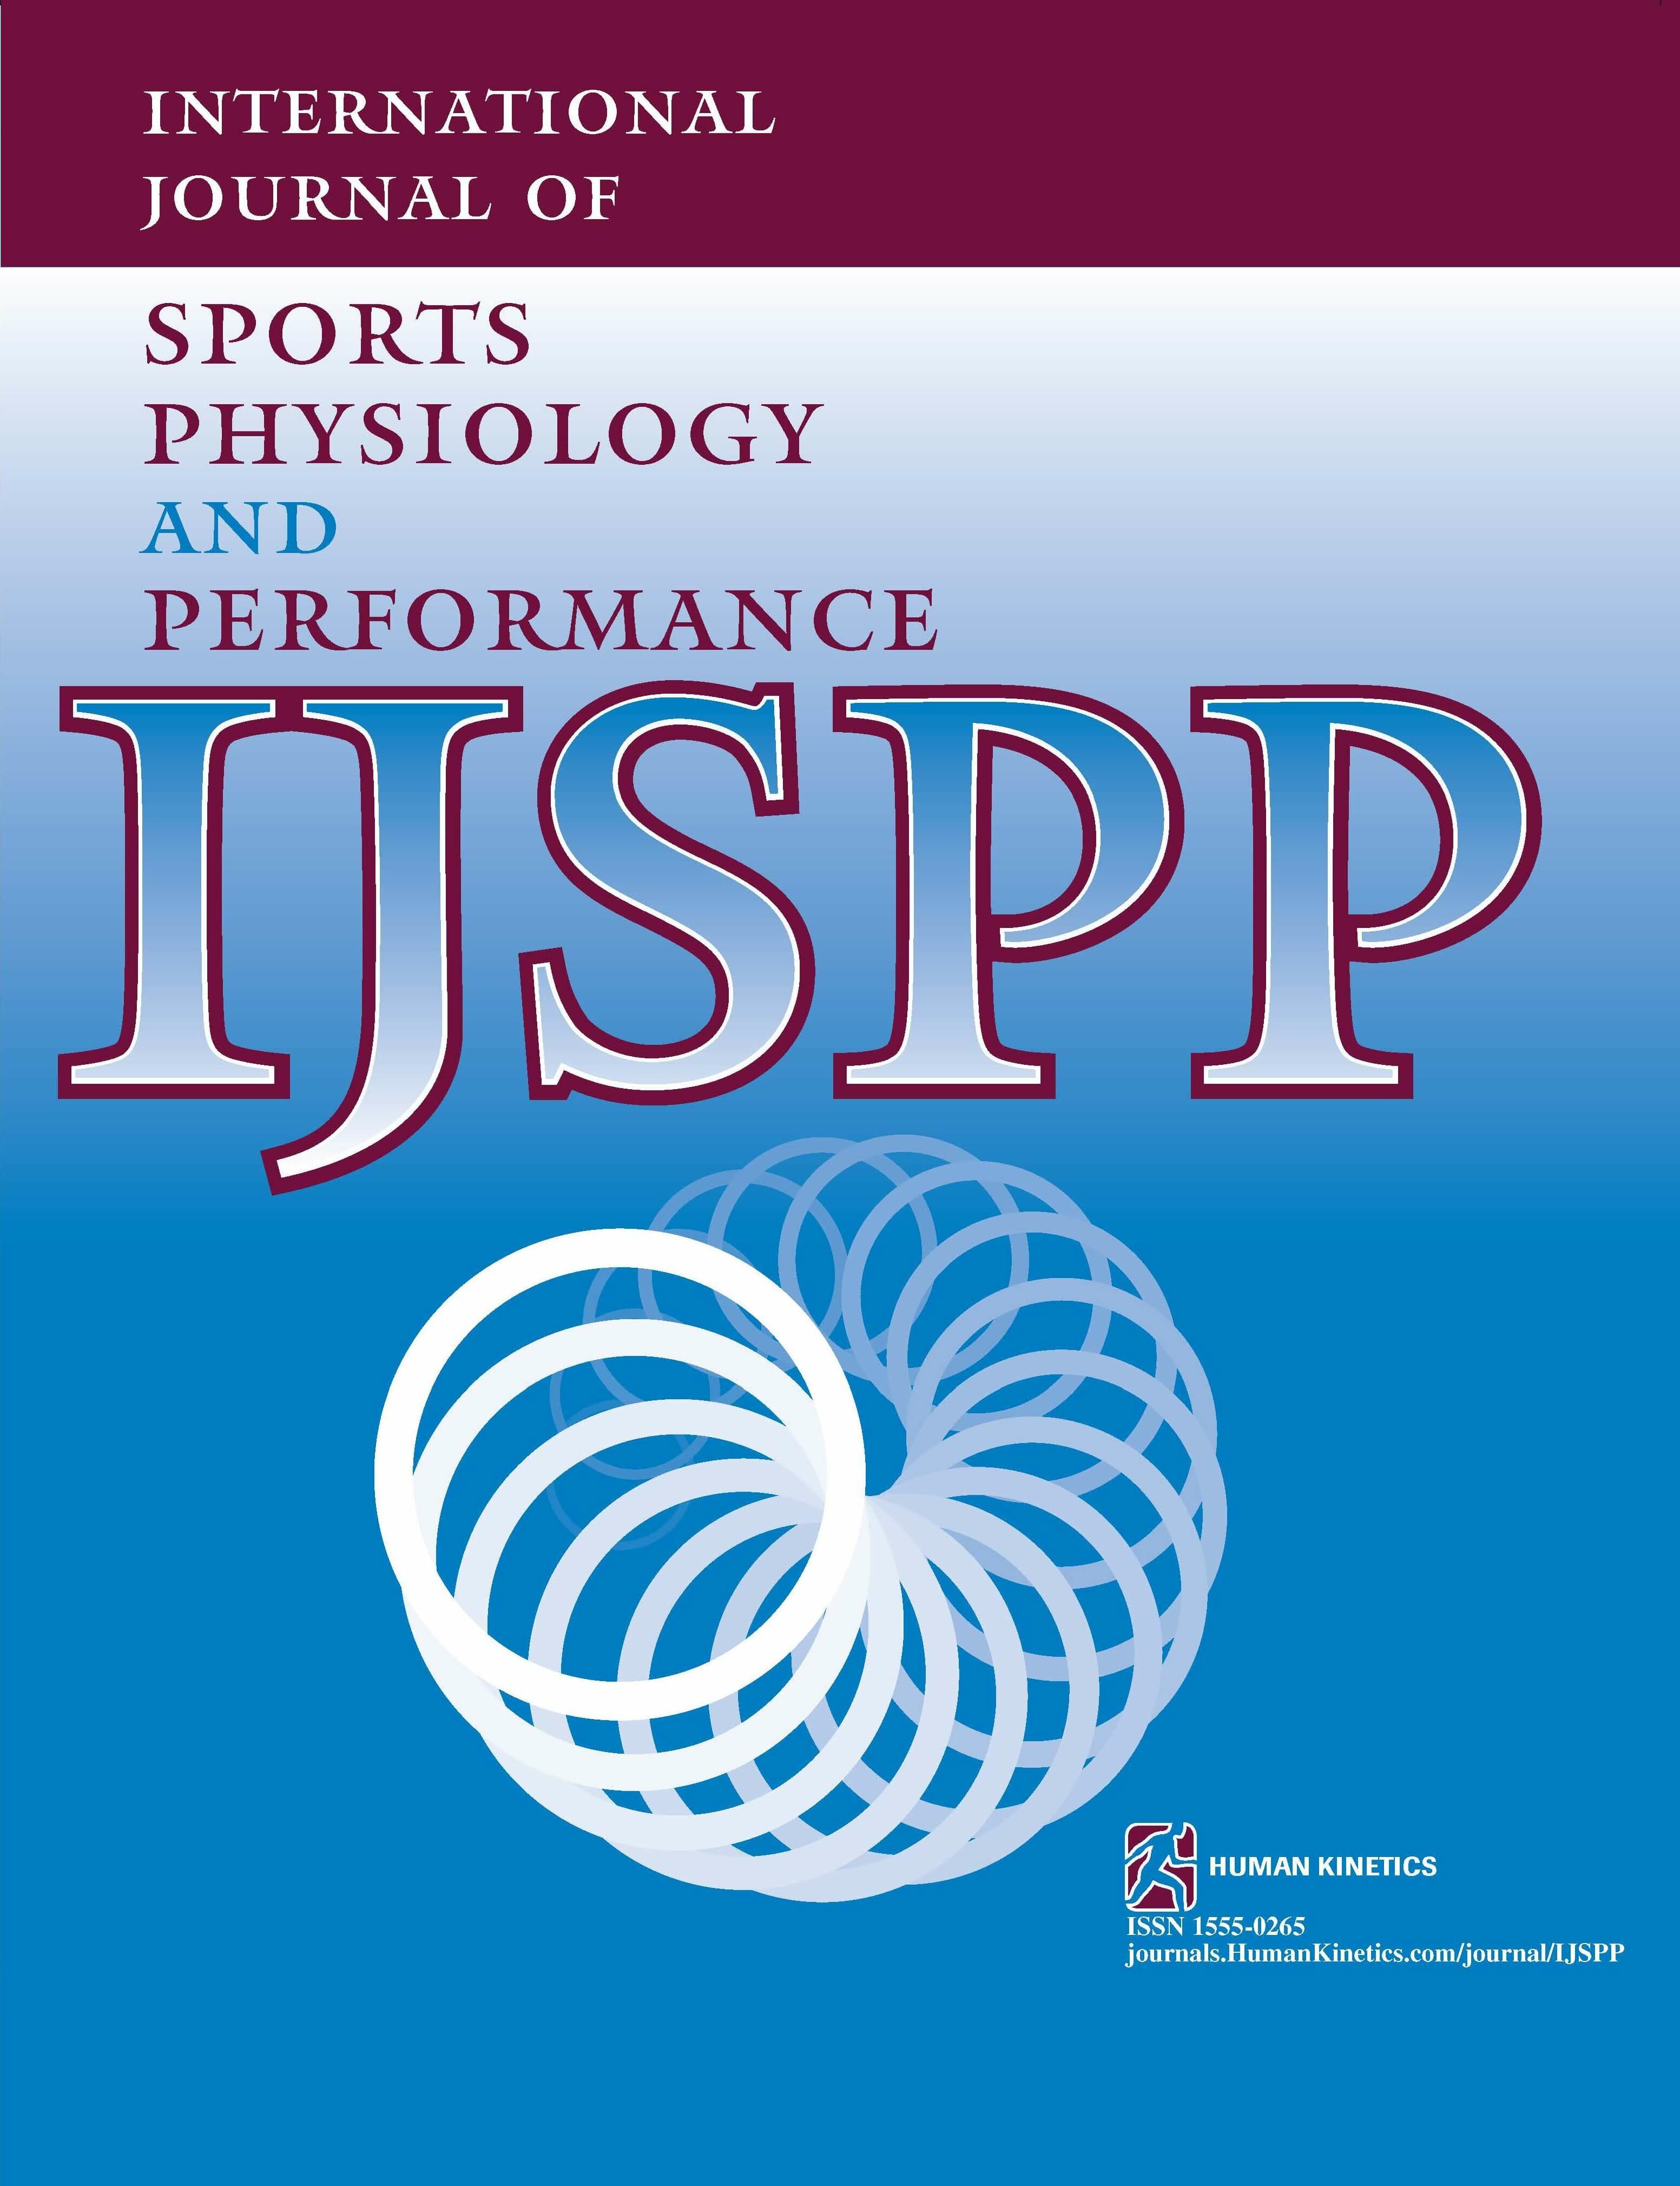 Effects of High-Intensity Inspiratory Muscle Warm-Up on High-Intensity Exercise Performance and Muscle Oxygenation